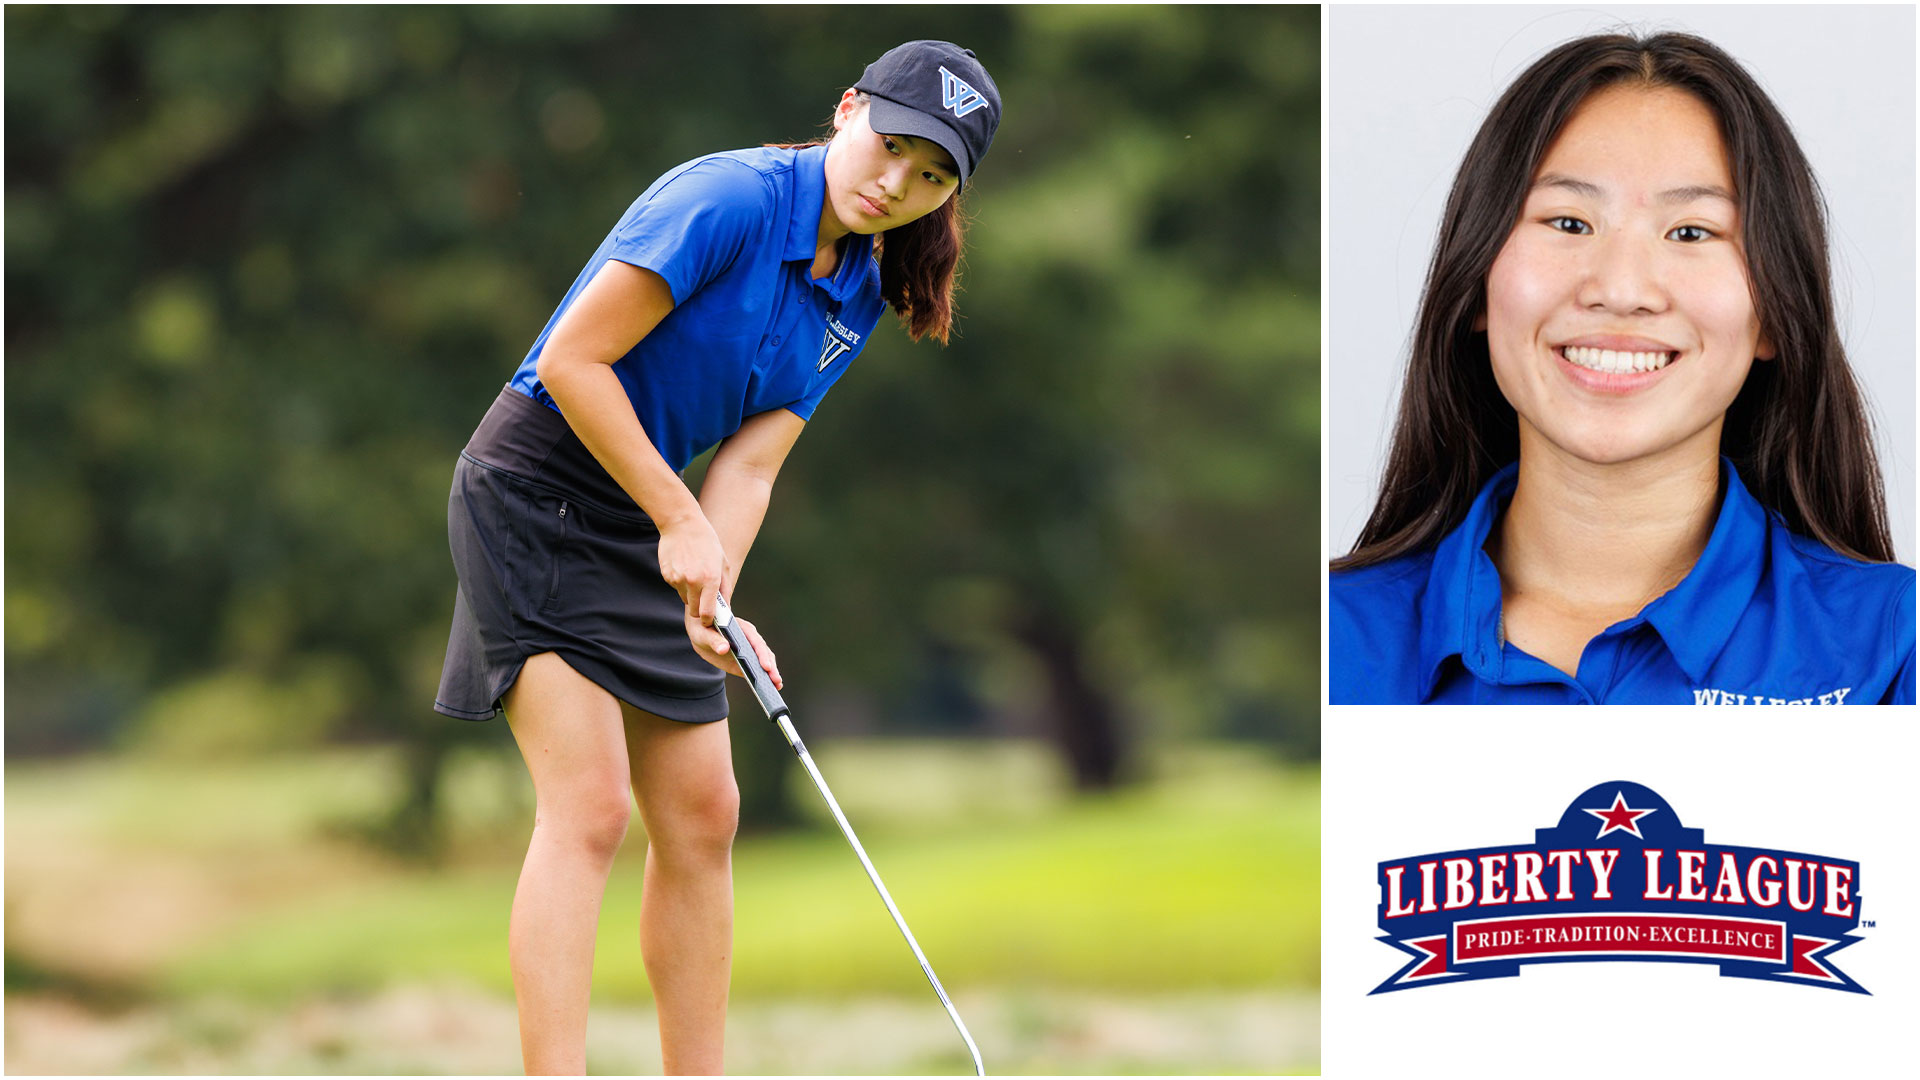 Yeh Earns Liberty League Women's Golf Rookie of the Week Honor